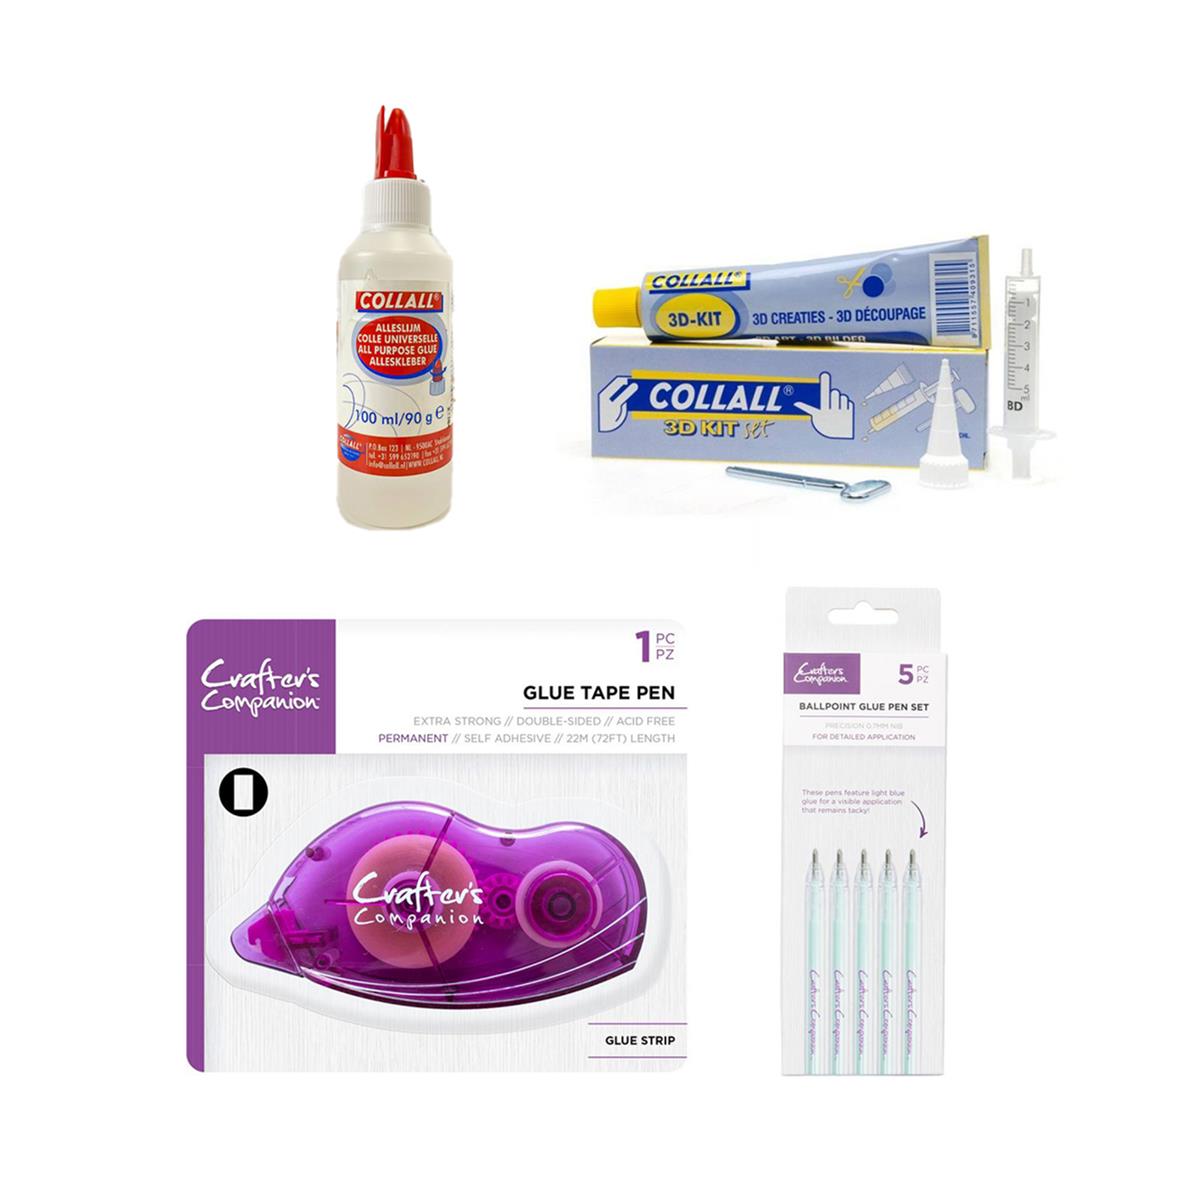 Crafter's Companion Essential 6 Bottle Glue Collection - All